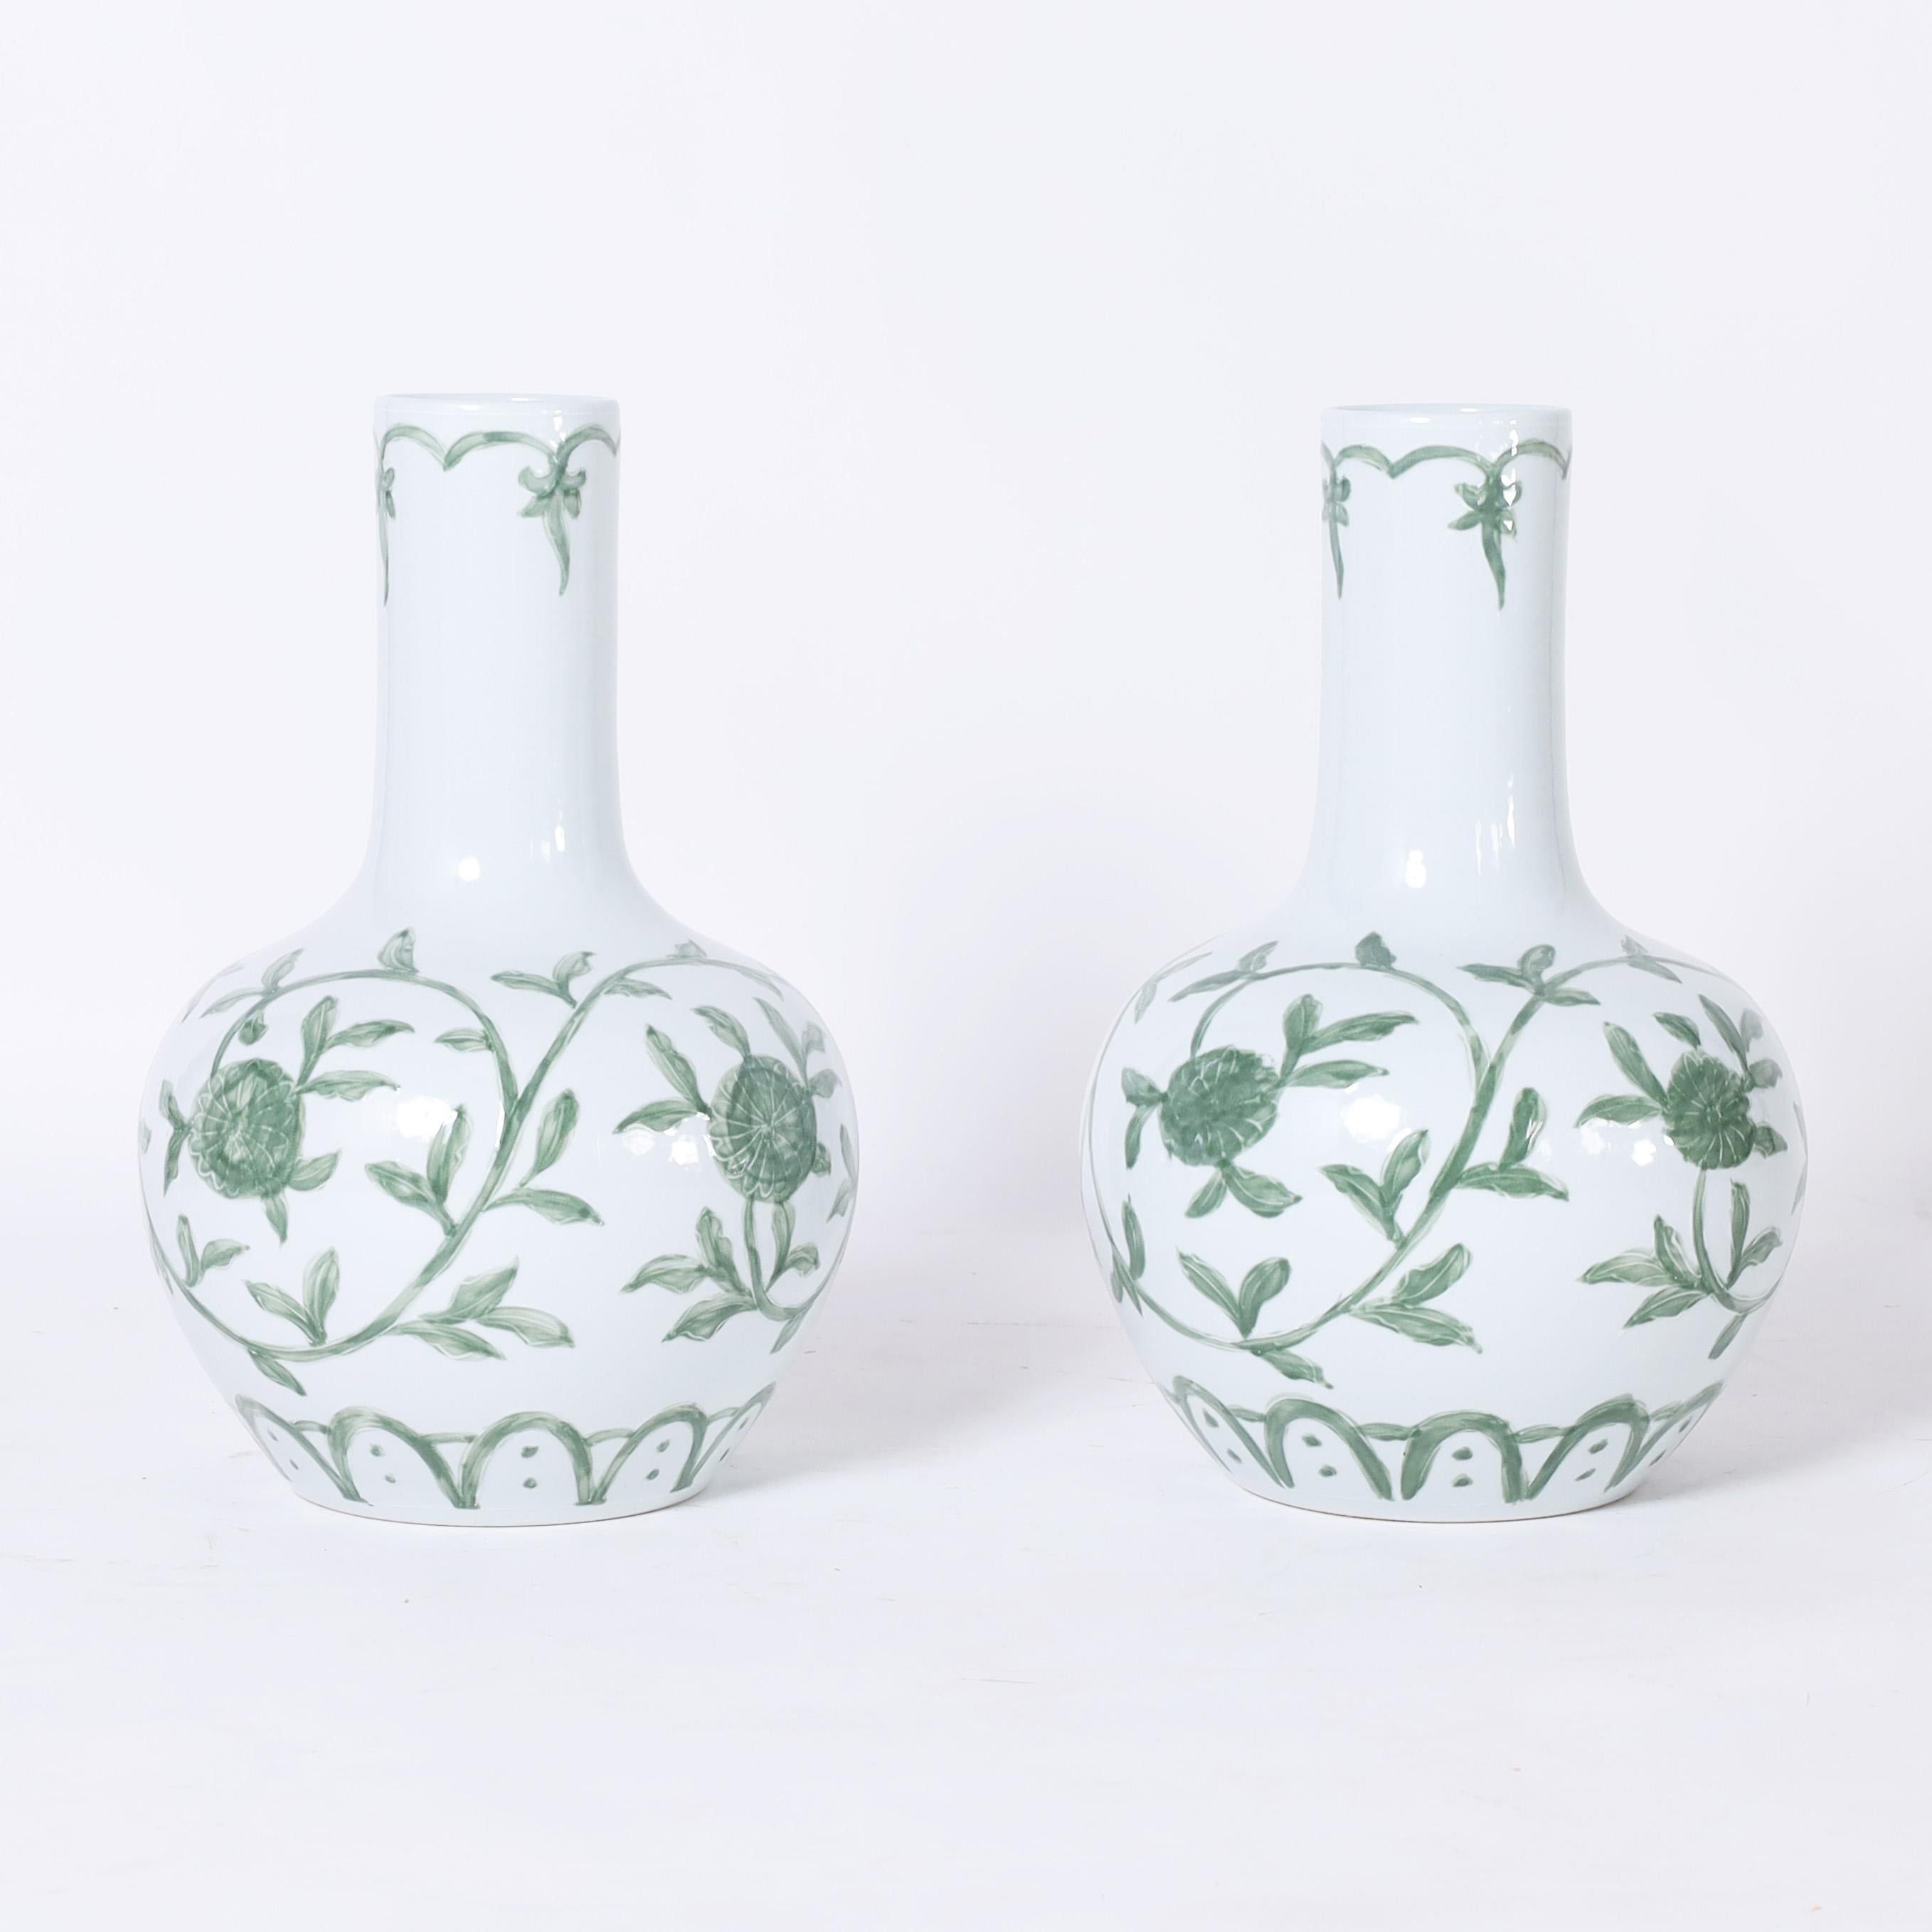 Delightful pair of Chinese porcelain vases with classic form and hand decorated in green and white floral designs. 